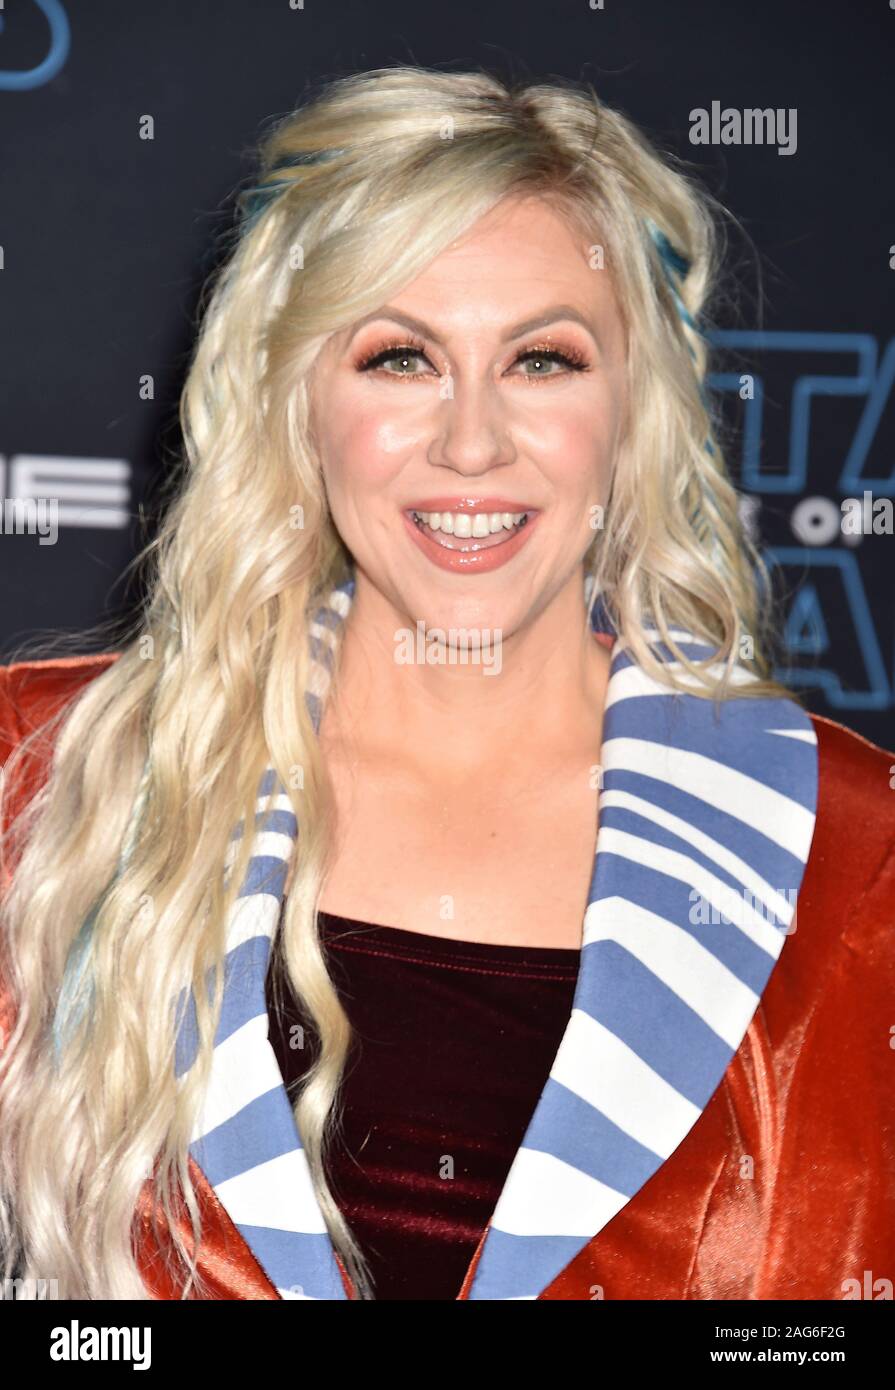 HOLLYWOOD, CA - DECEMBER 16: Ashley Eckstein attends the Premiere of Disney's 'Star Wars: The Rise Of Skywalker' at the El Capitan Theatre on December 16, 2019 in Hollywood, California. Stock Photo